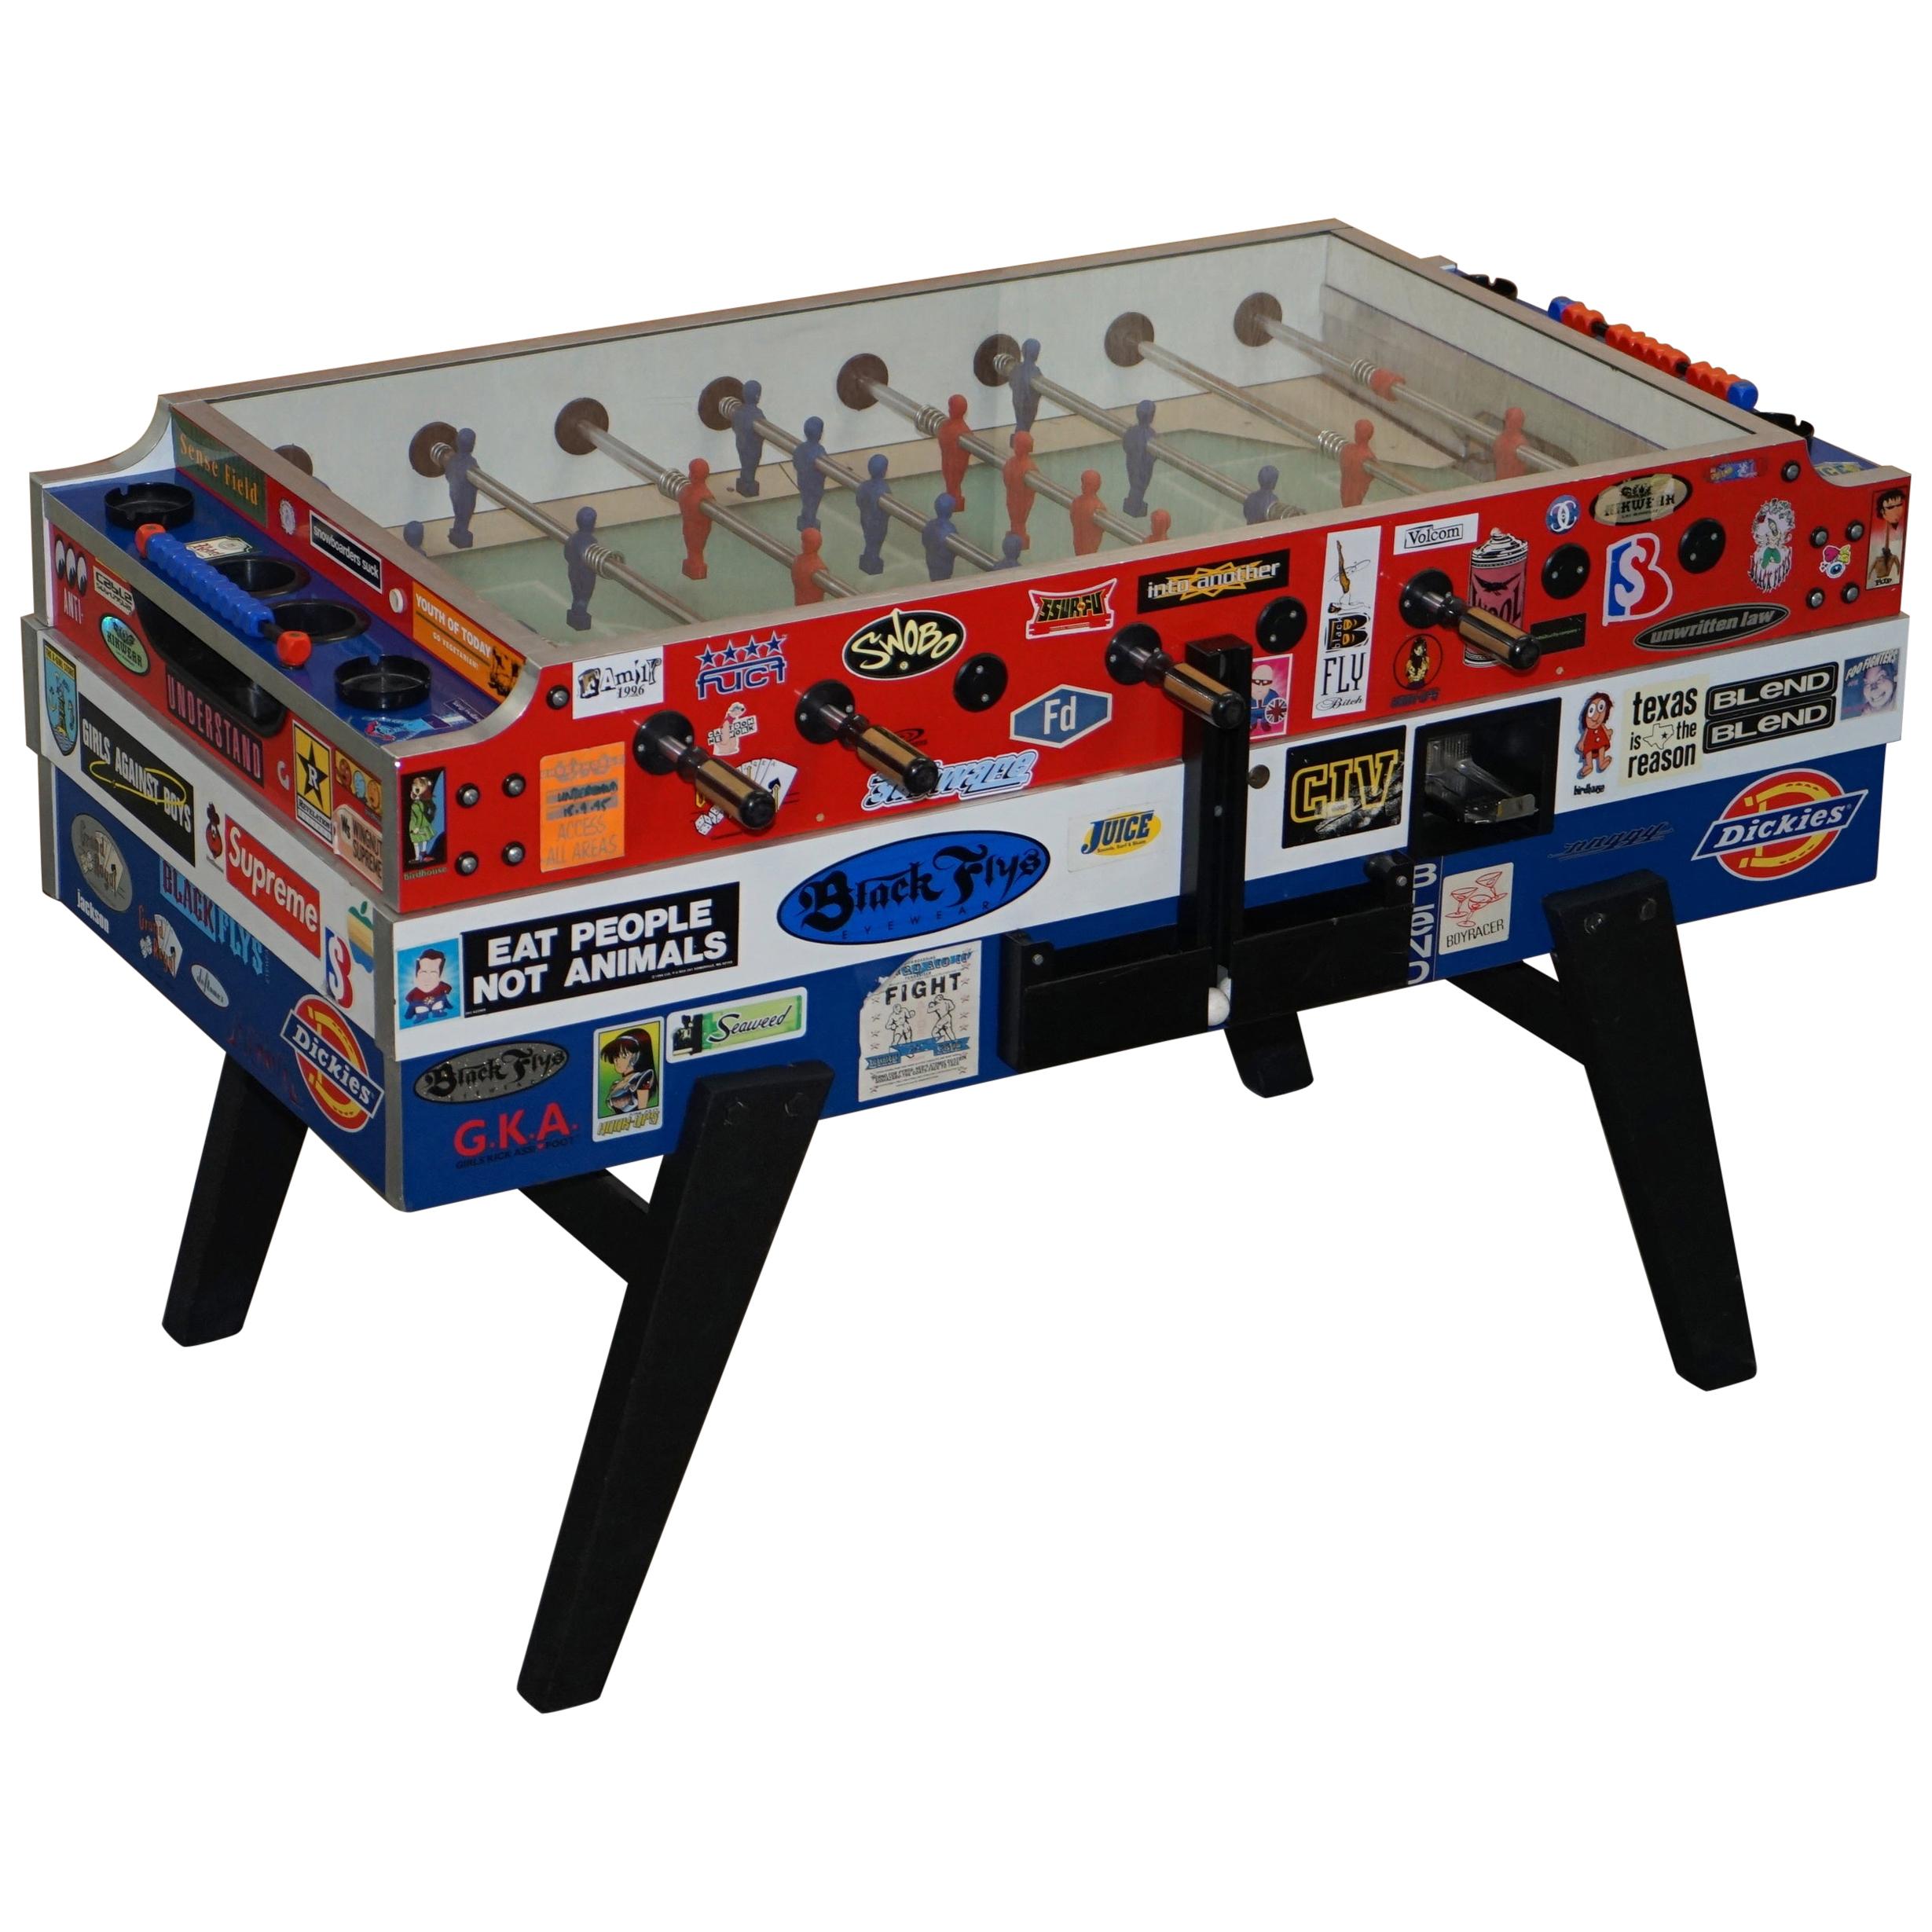 Vintage Red White & Blue Foosball Table Football Covered in Pop Culture Stickers